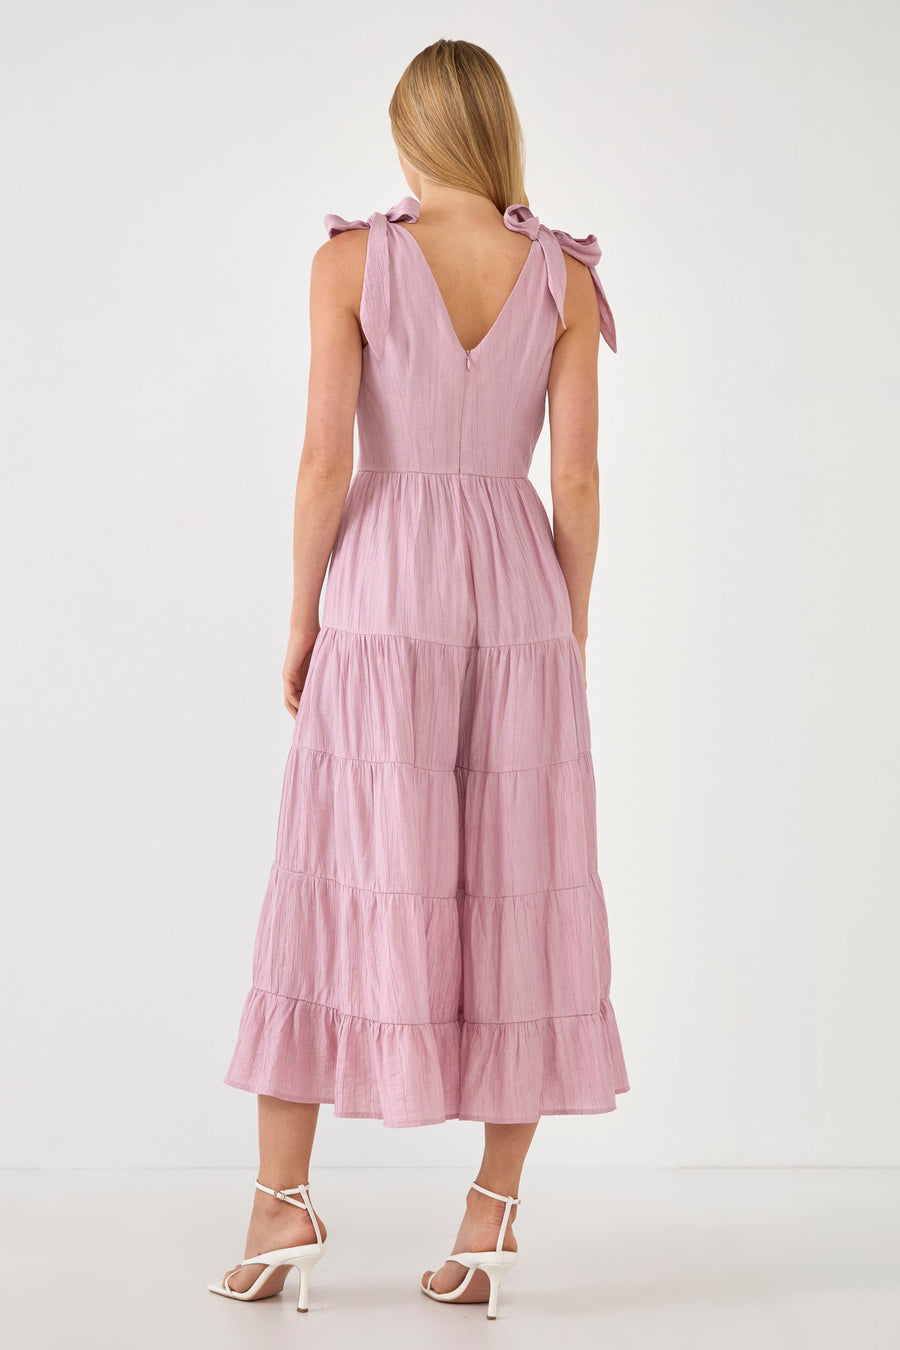 FREE THE ROSES-Tiered Jumpsuit with Bow Tie Shoulders-JUMPSUITS available at Objectrare